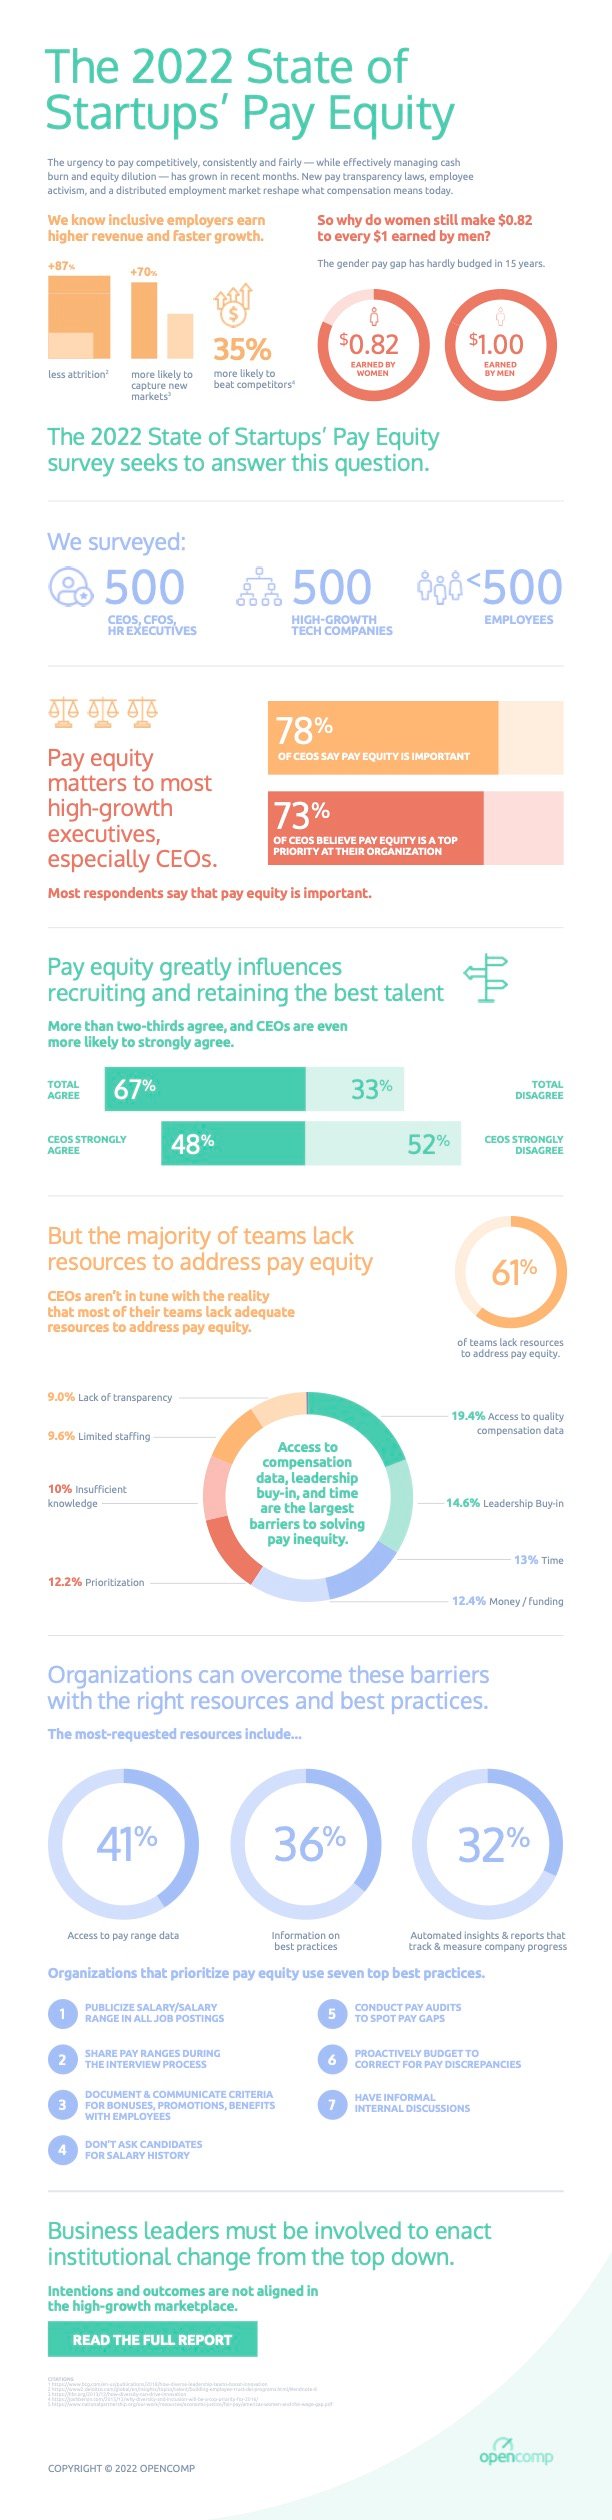 Infographic_The_State_of_Startups_Pay_Equity_in_2022